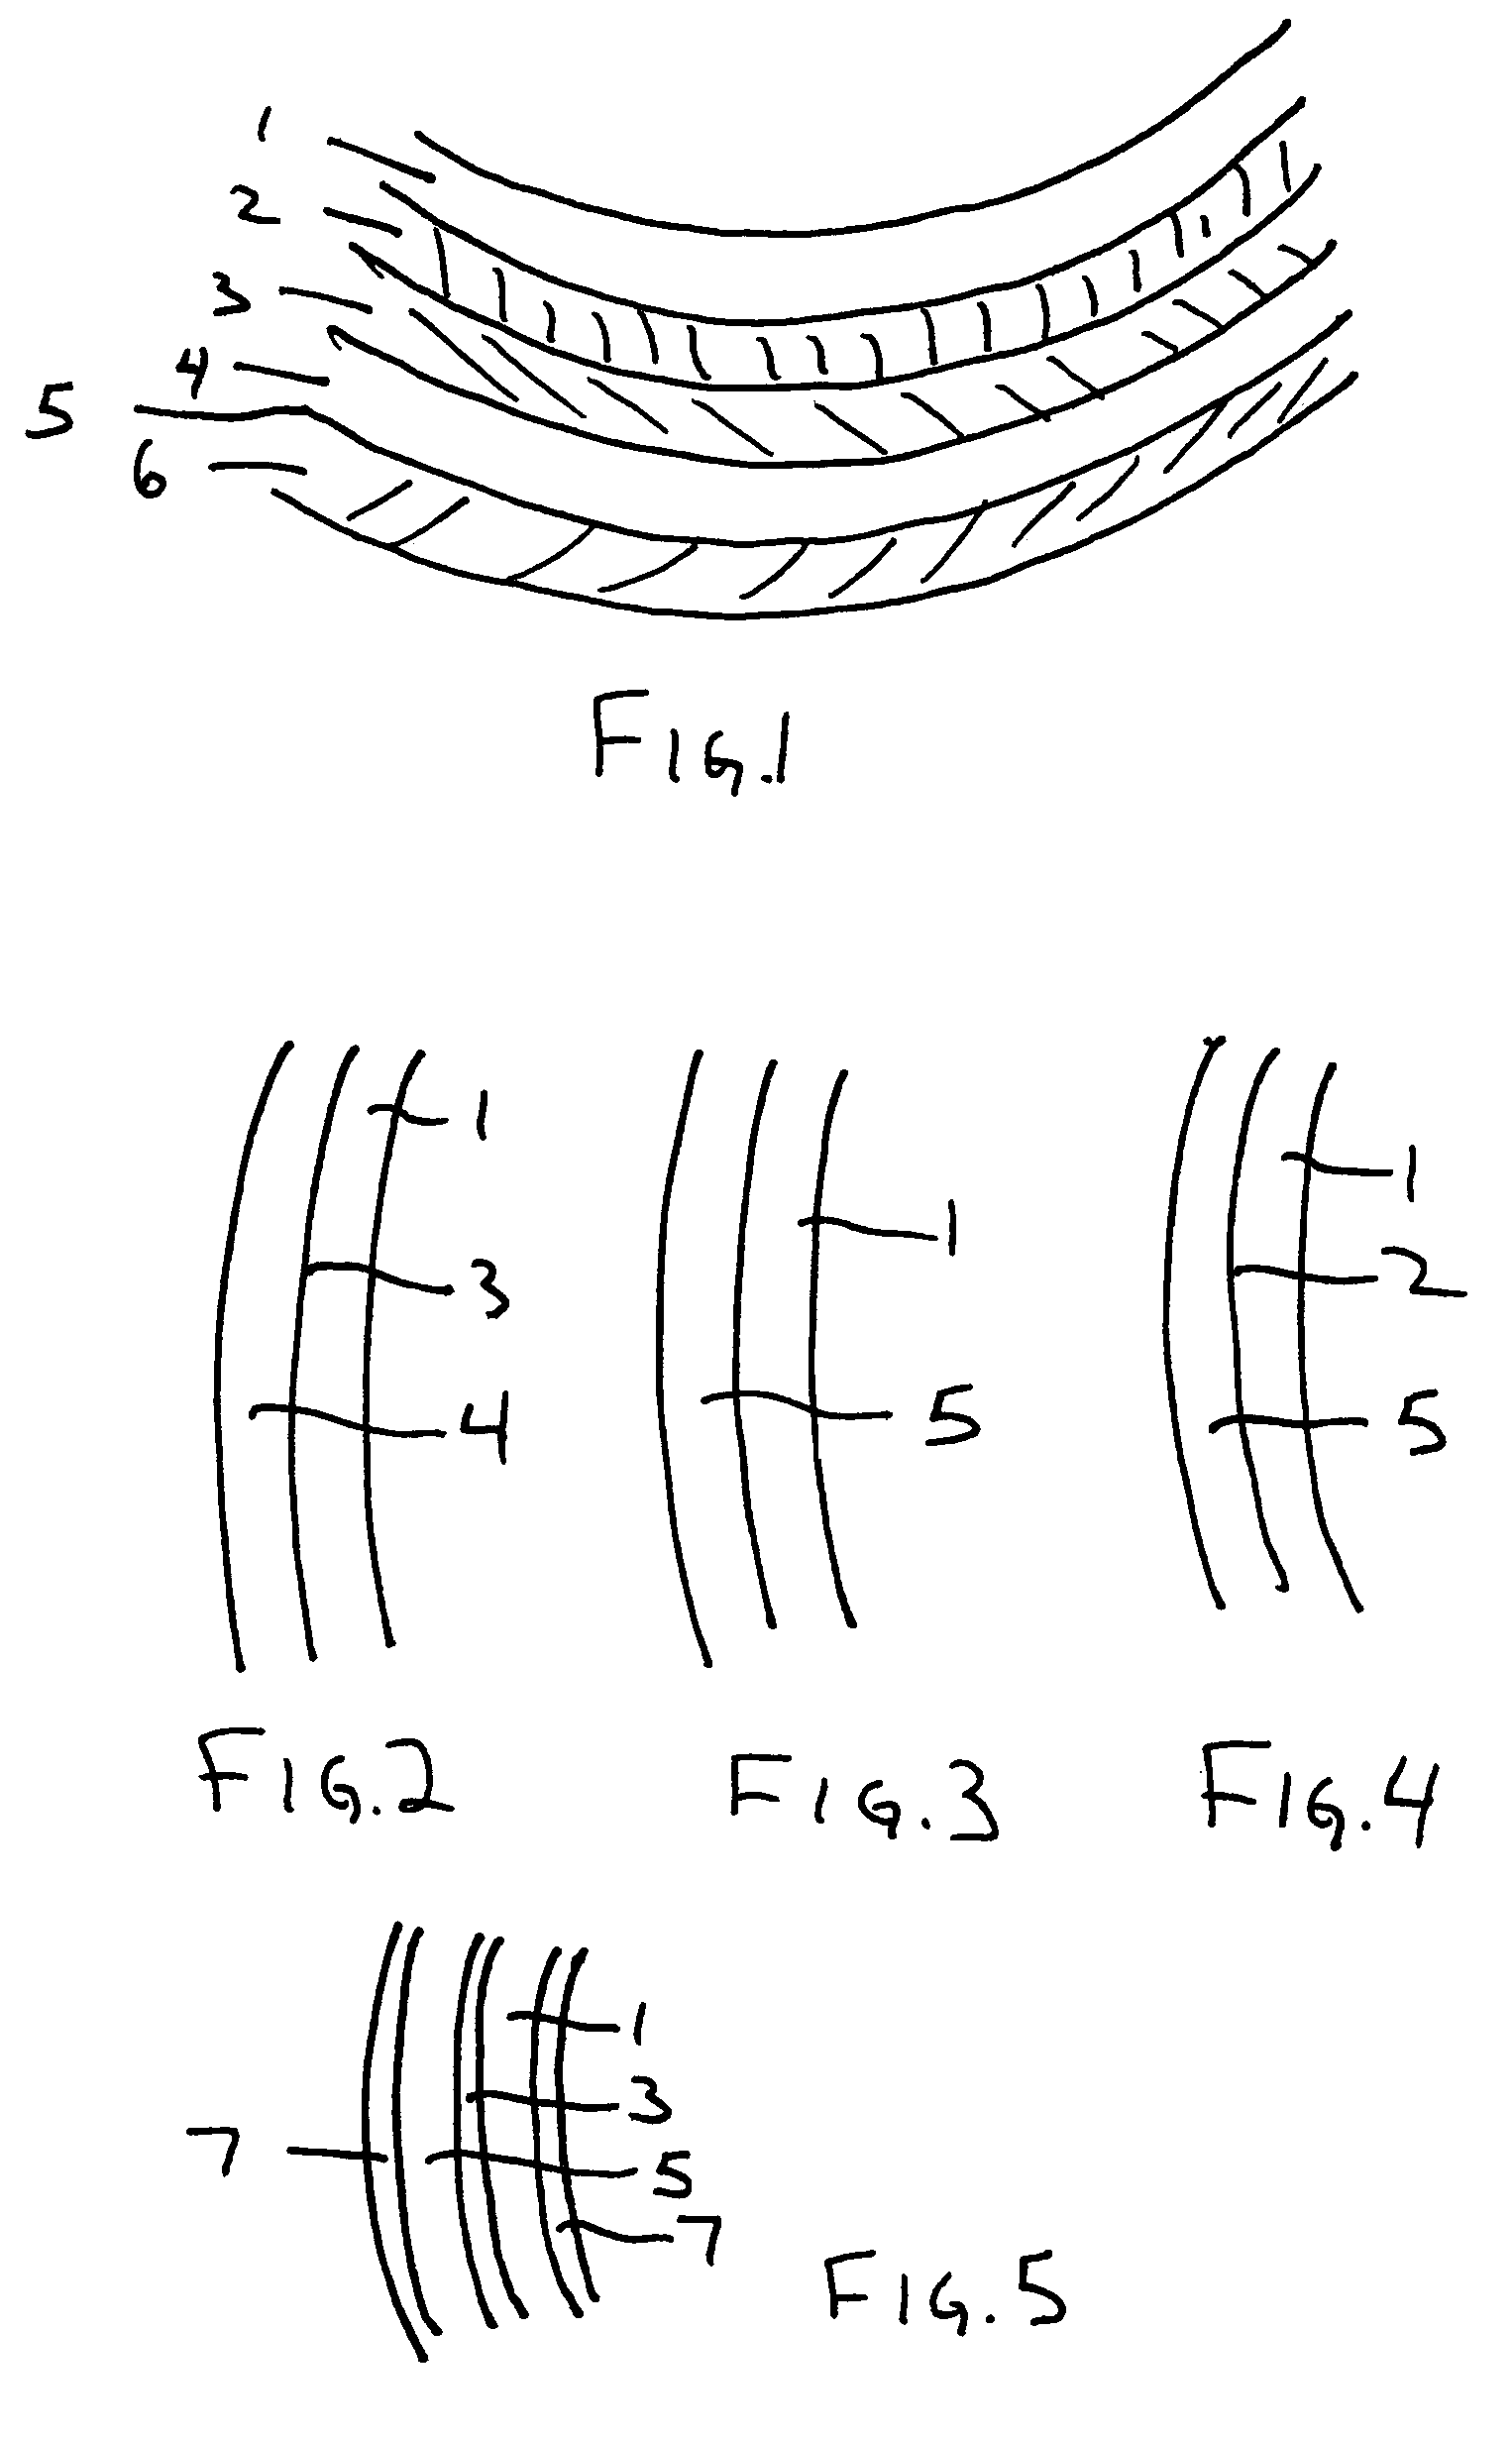 Method of forming polarized or photochromic lenses by fusing polycarbonate with other plastic materials